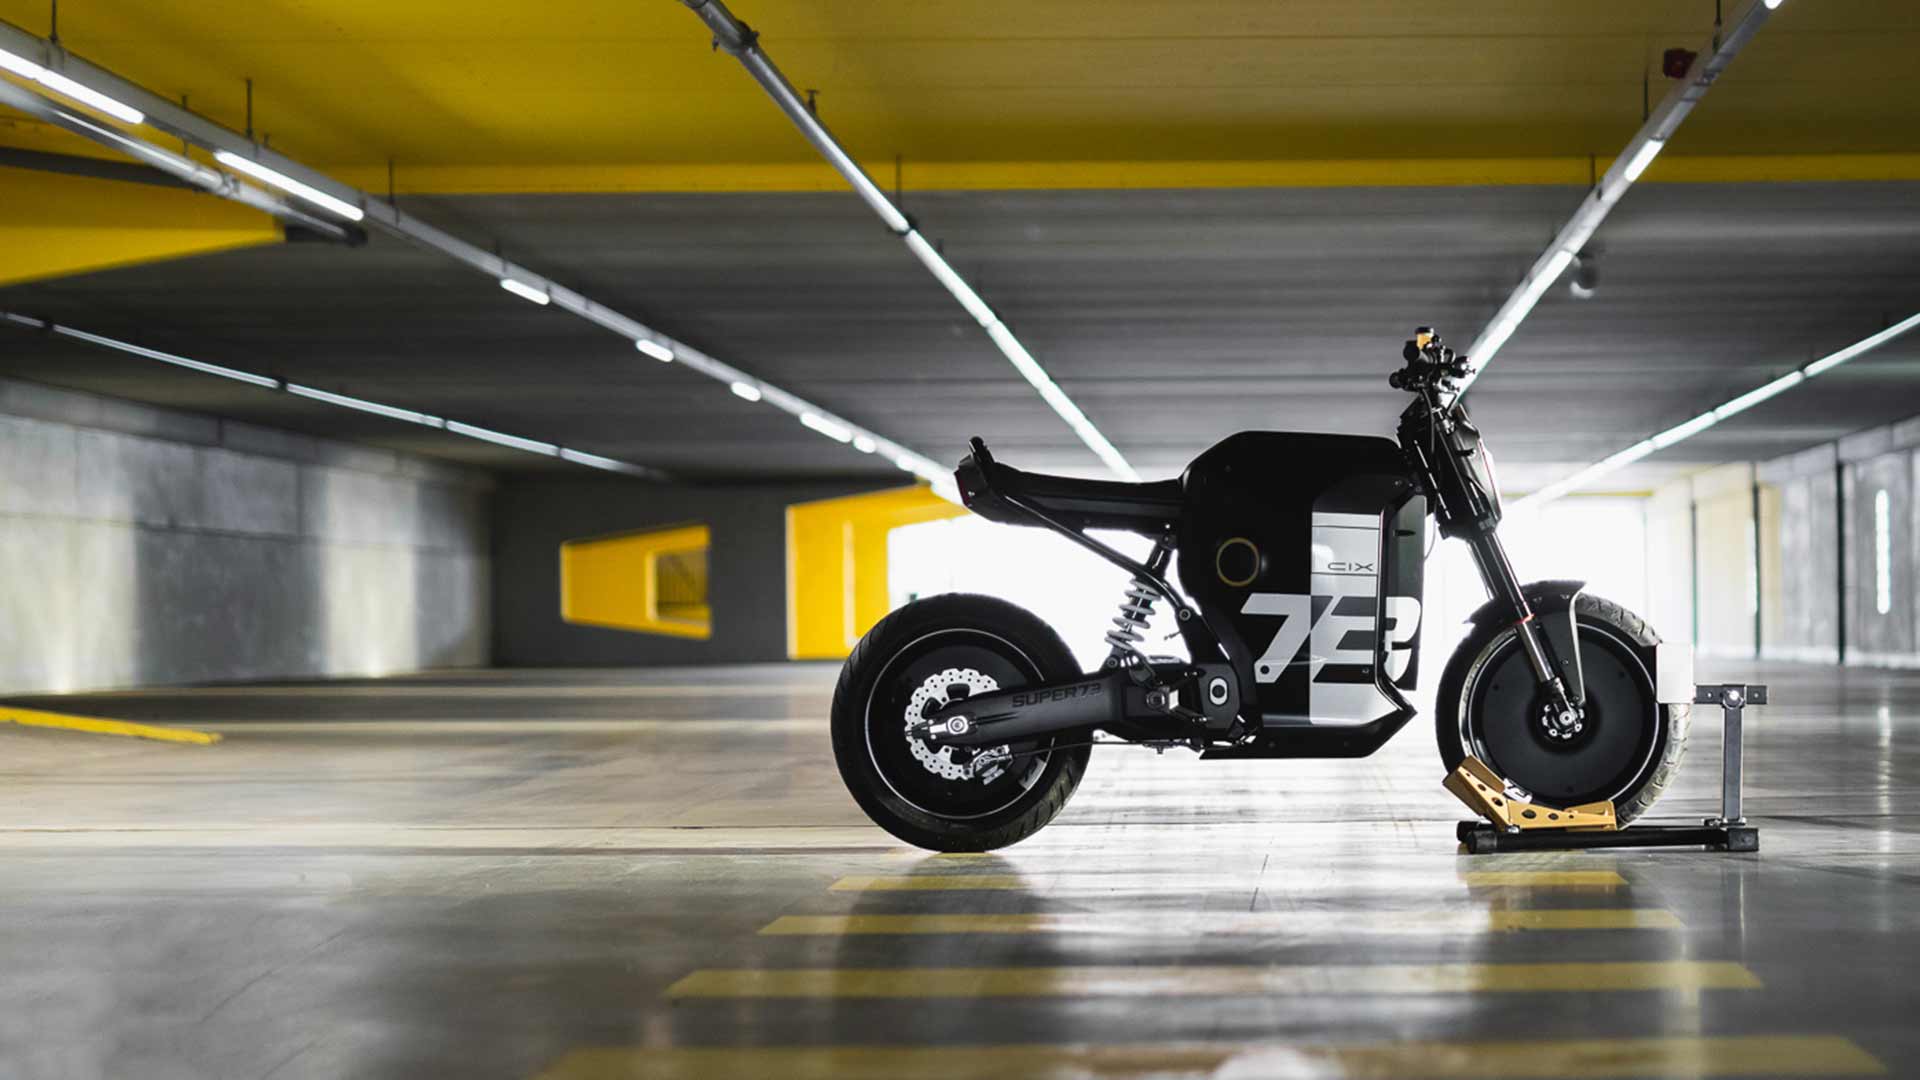 Lifestyle image of a C1X in a parking garage.